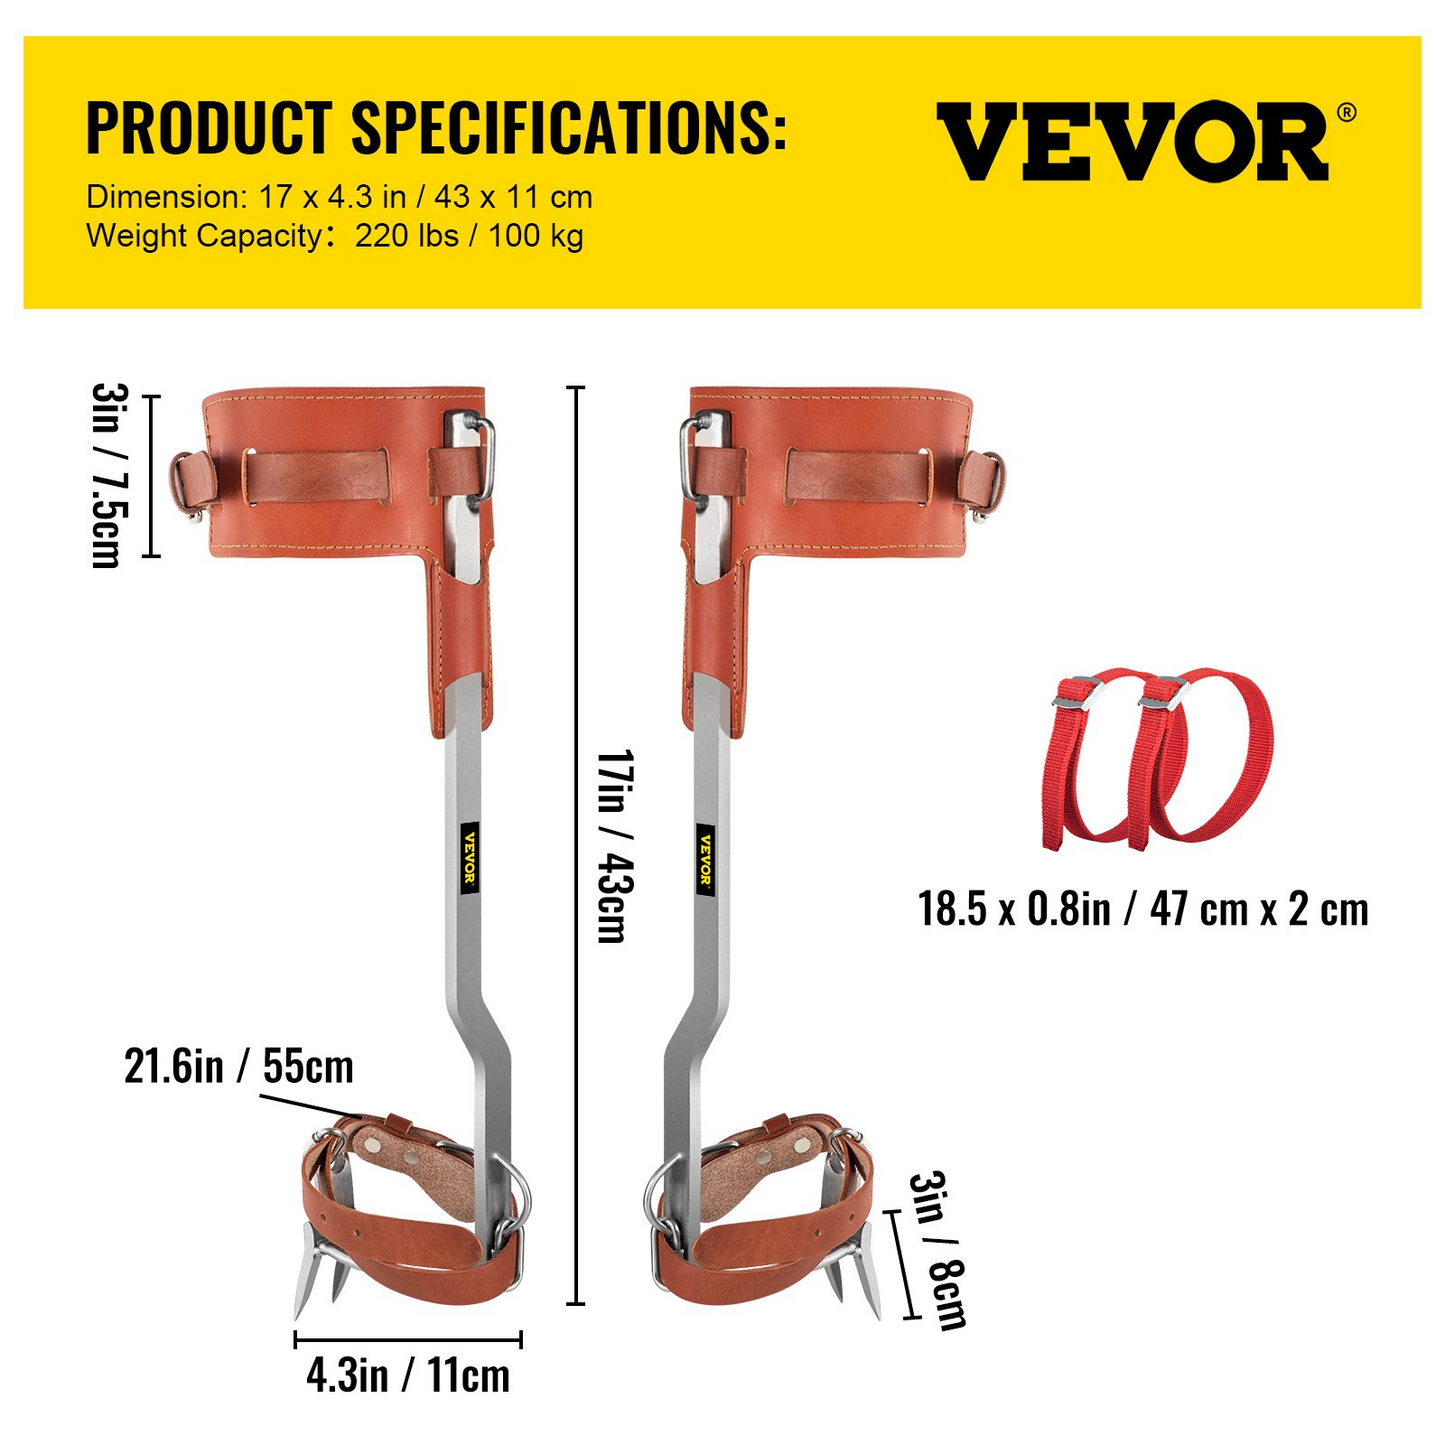 VEVOR Tree Climbing Spikes | Stainless Steel Pole Climbing Spurs with Adjustable Straps and Cow Leather Padding